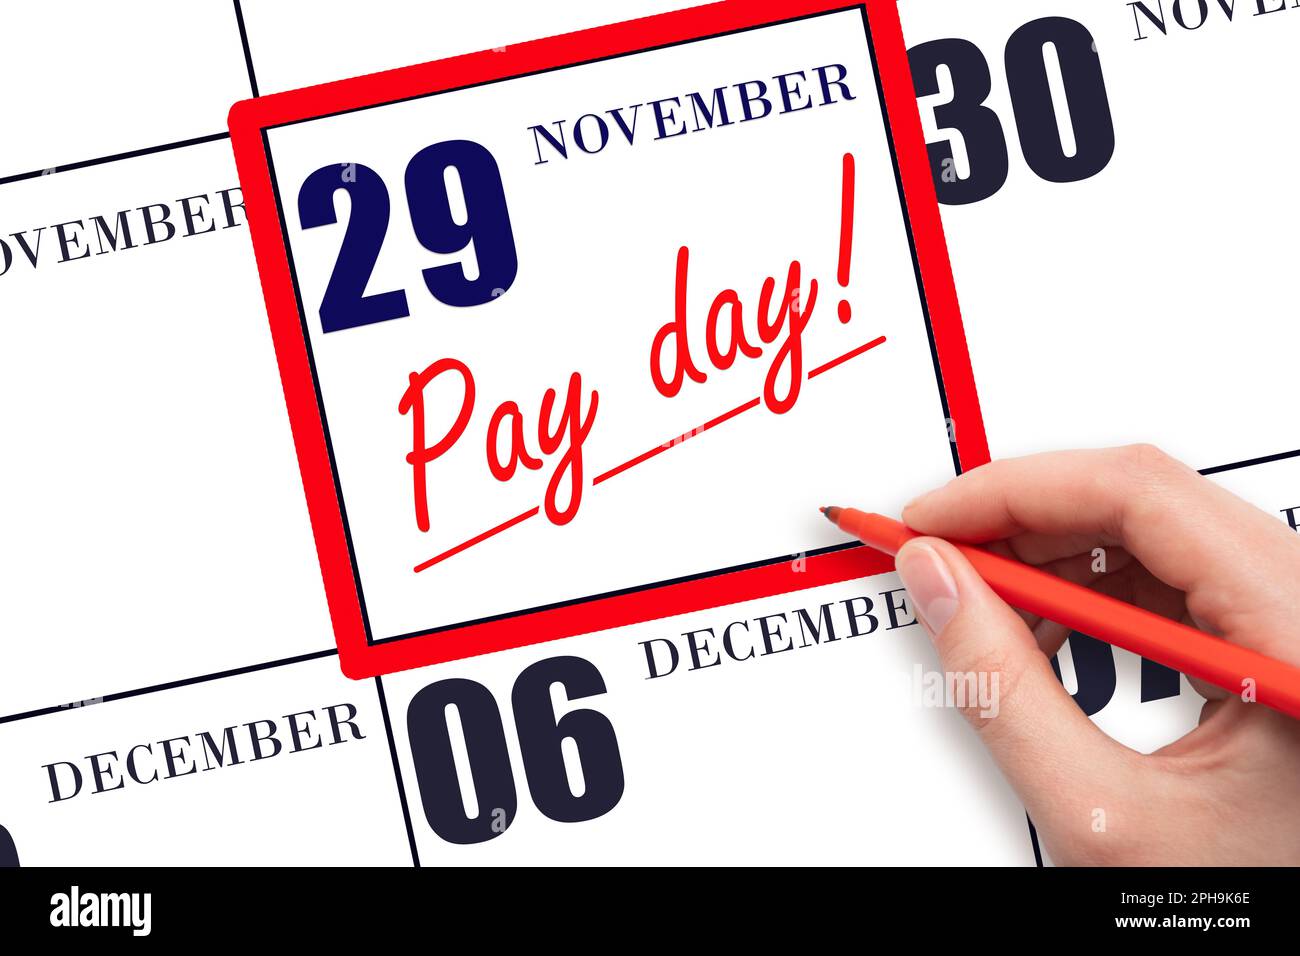 29th day of November. Hand writing text PAY DATE on calendar date November 29 and underline it. Payment due date.  Reminder concept of payment. Autumn Stock Photo